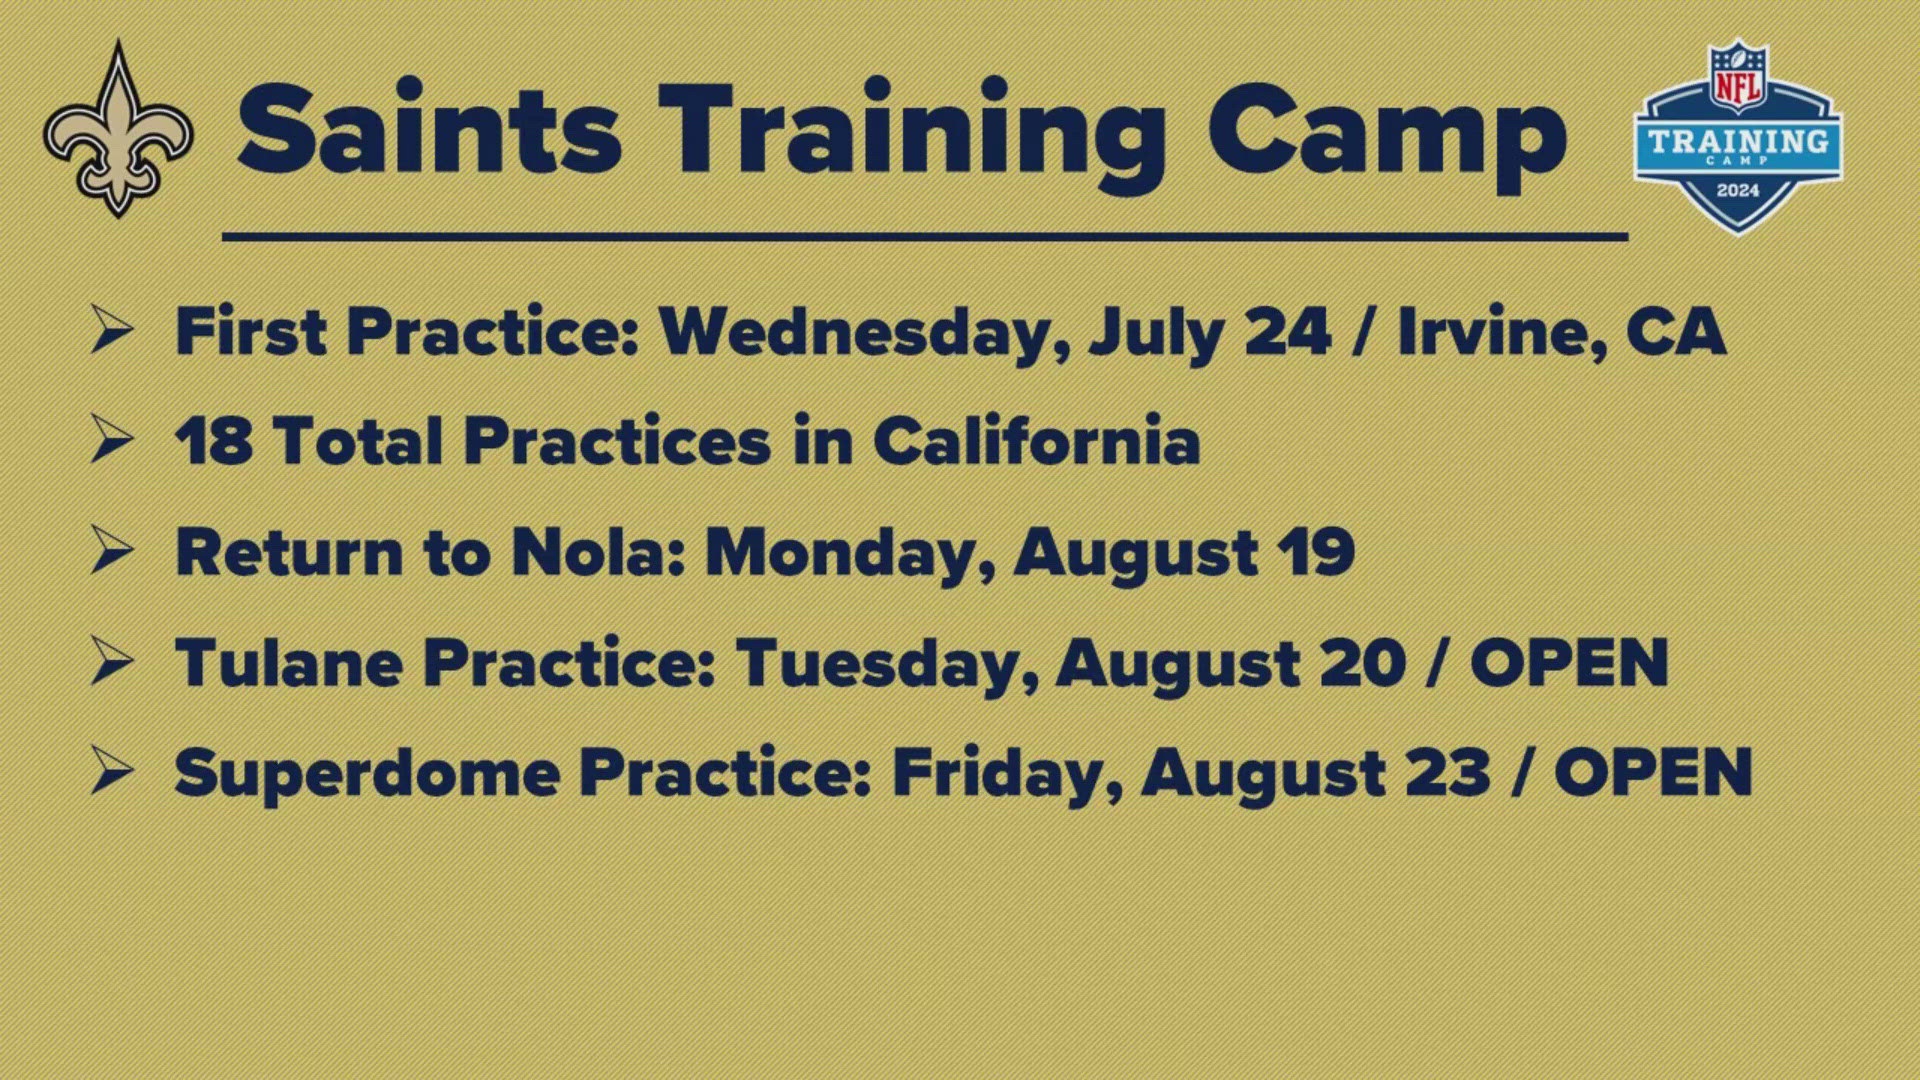 The Saints begin camp in Irvine on July 24.